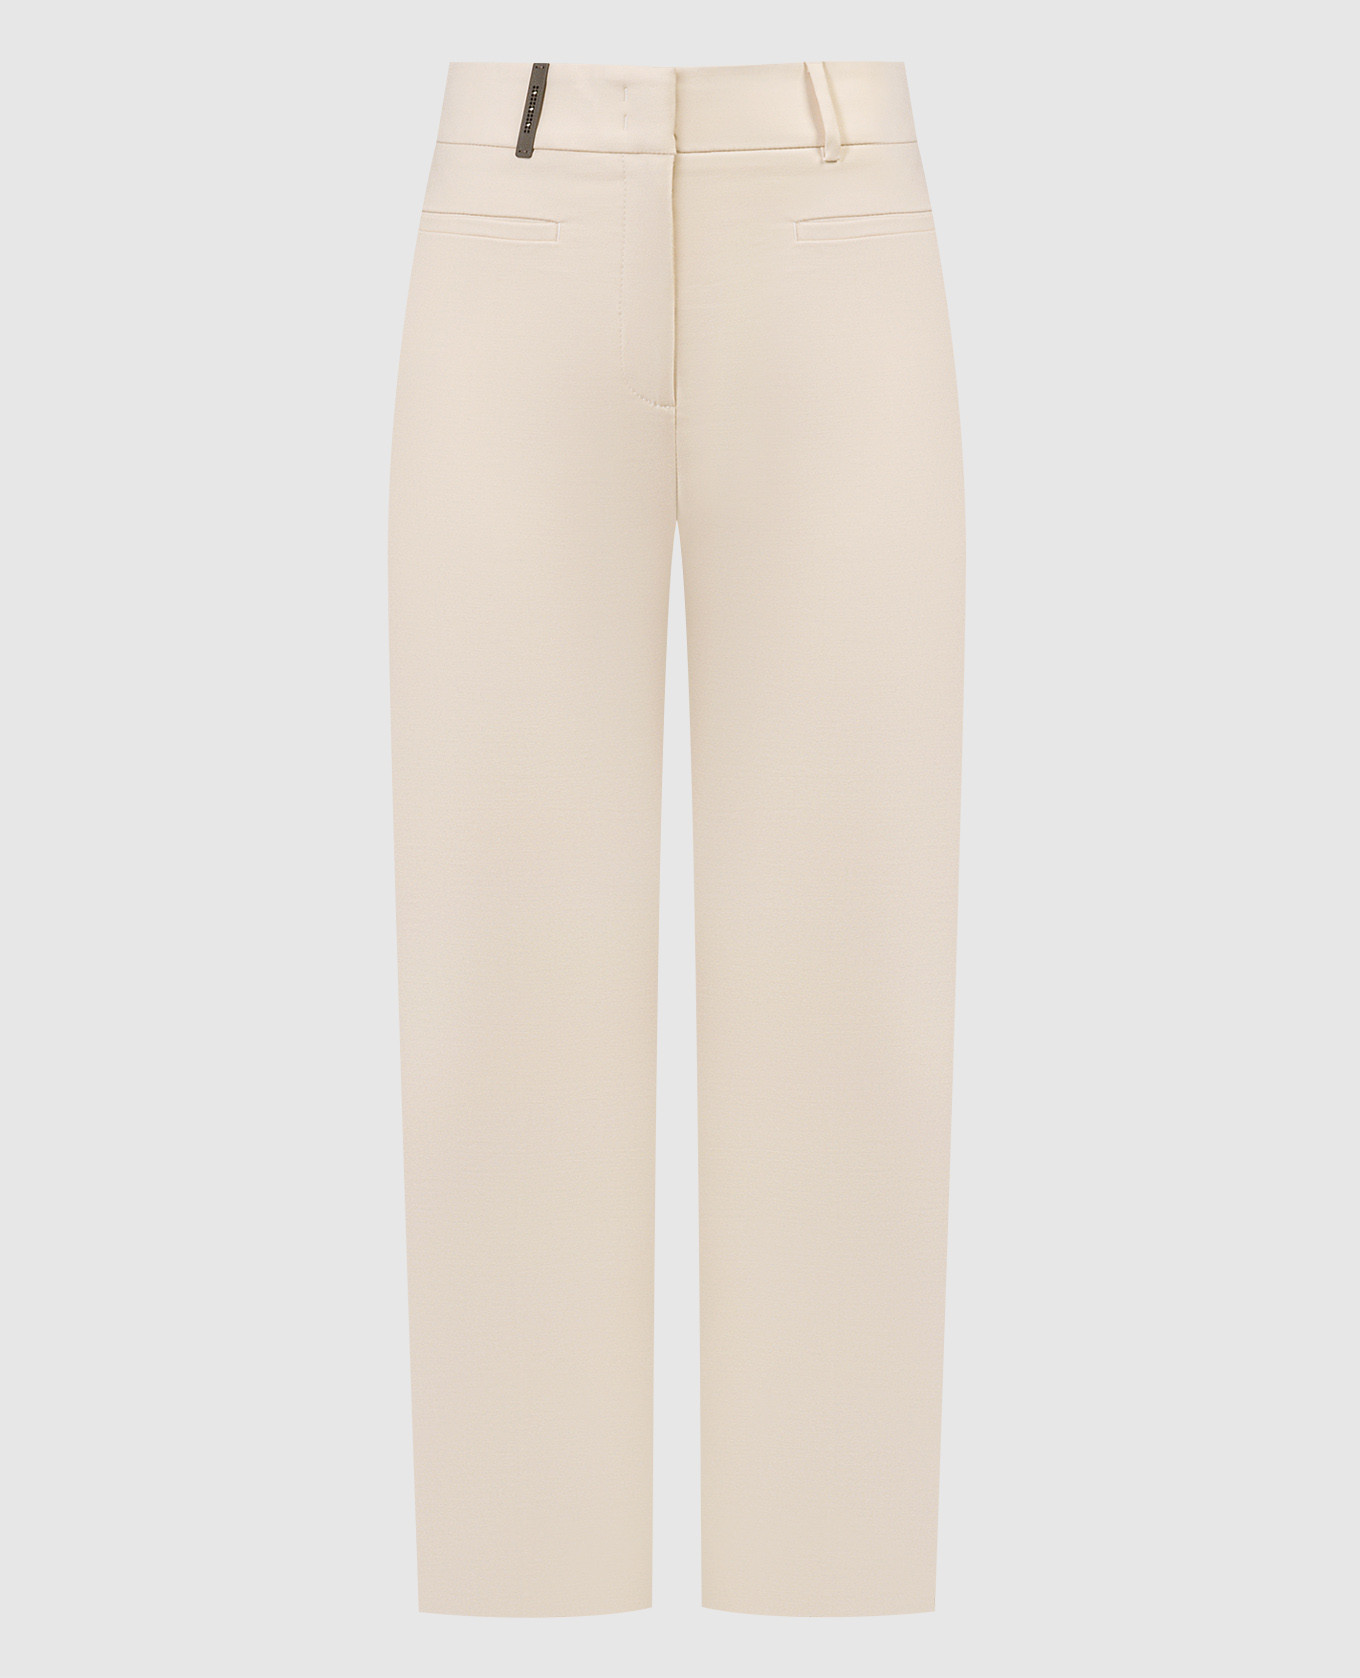 Beige pants with a patch